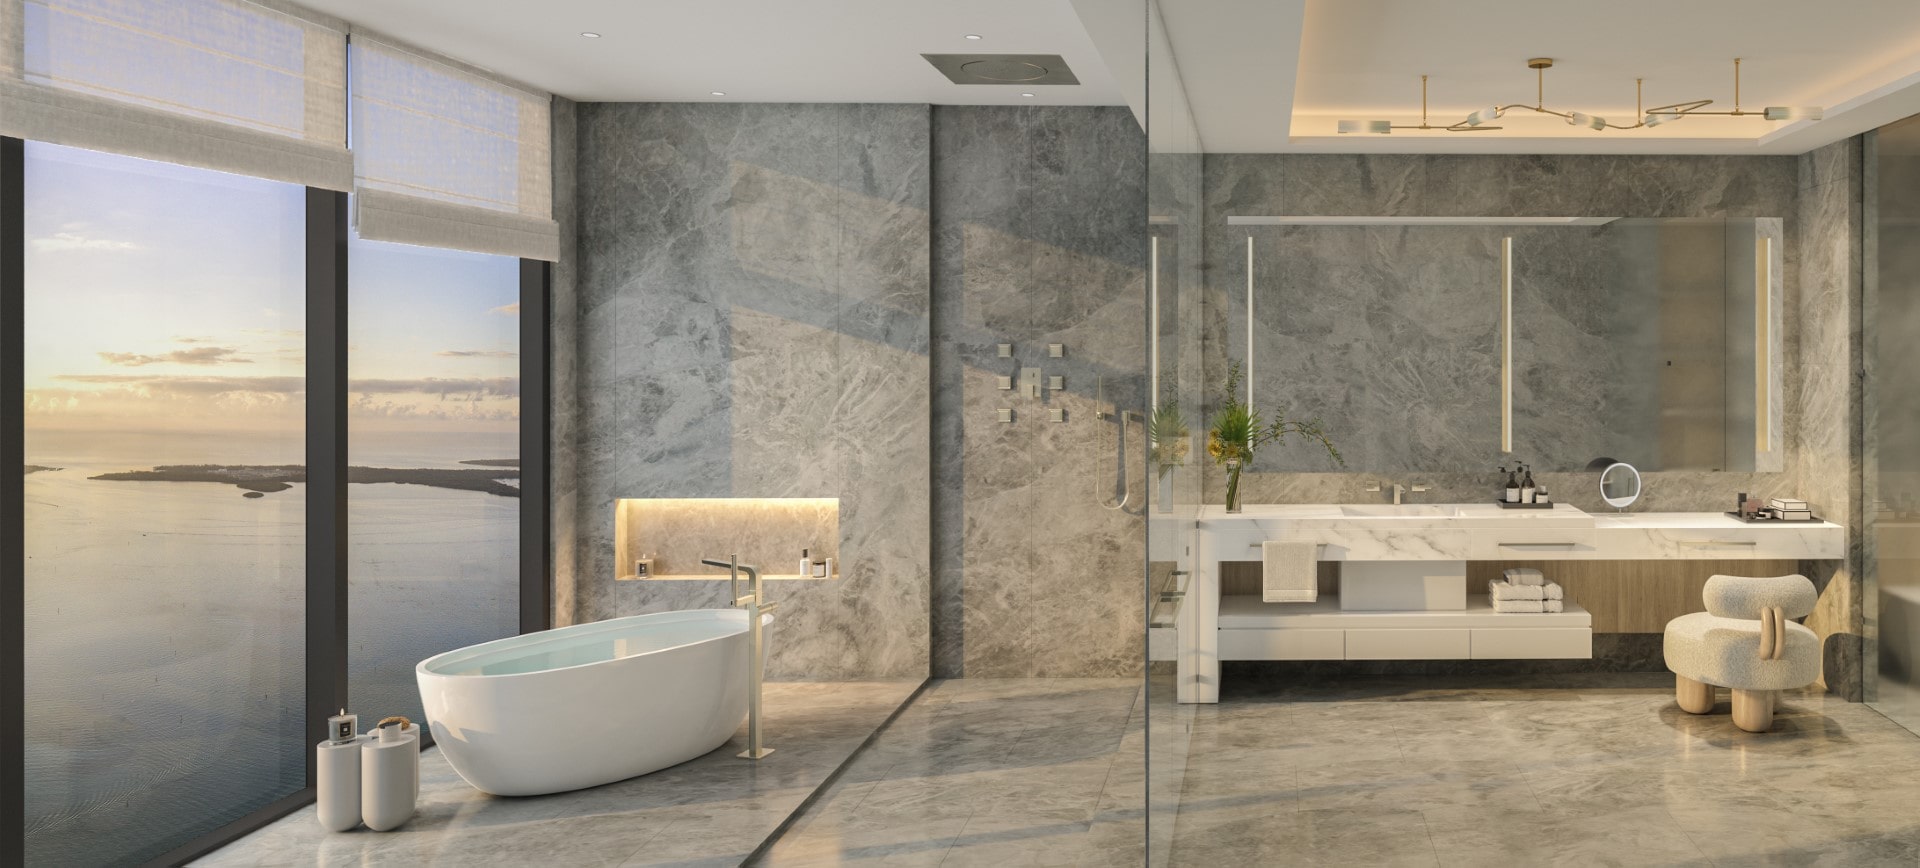 Waldorf Astoria Penthouse Primary Bathroom with Water Views